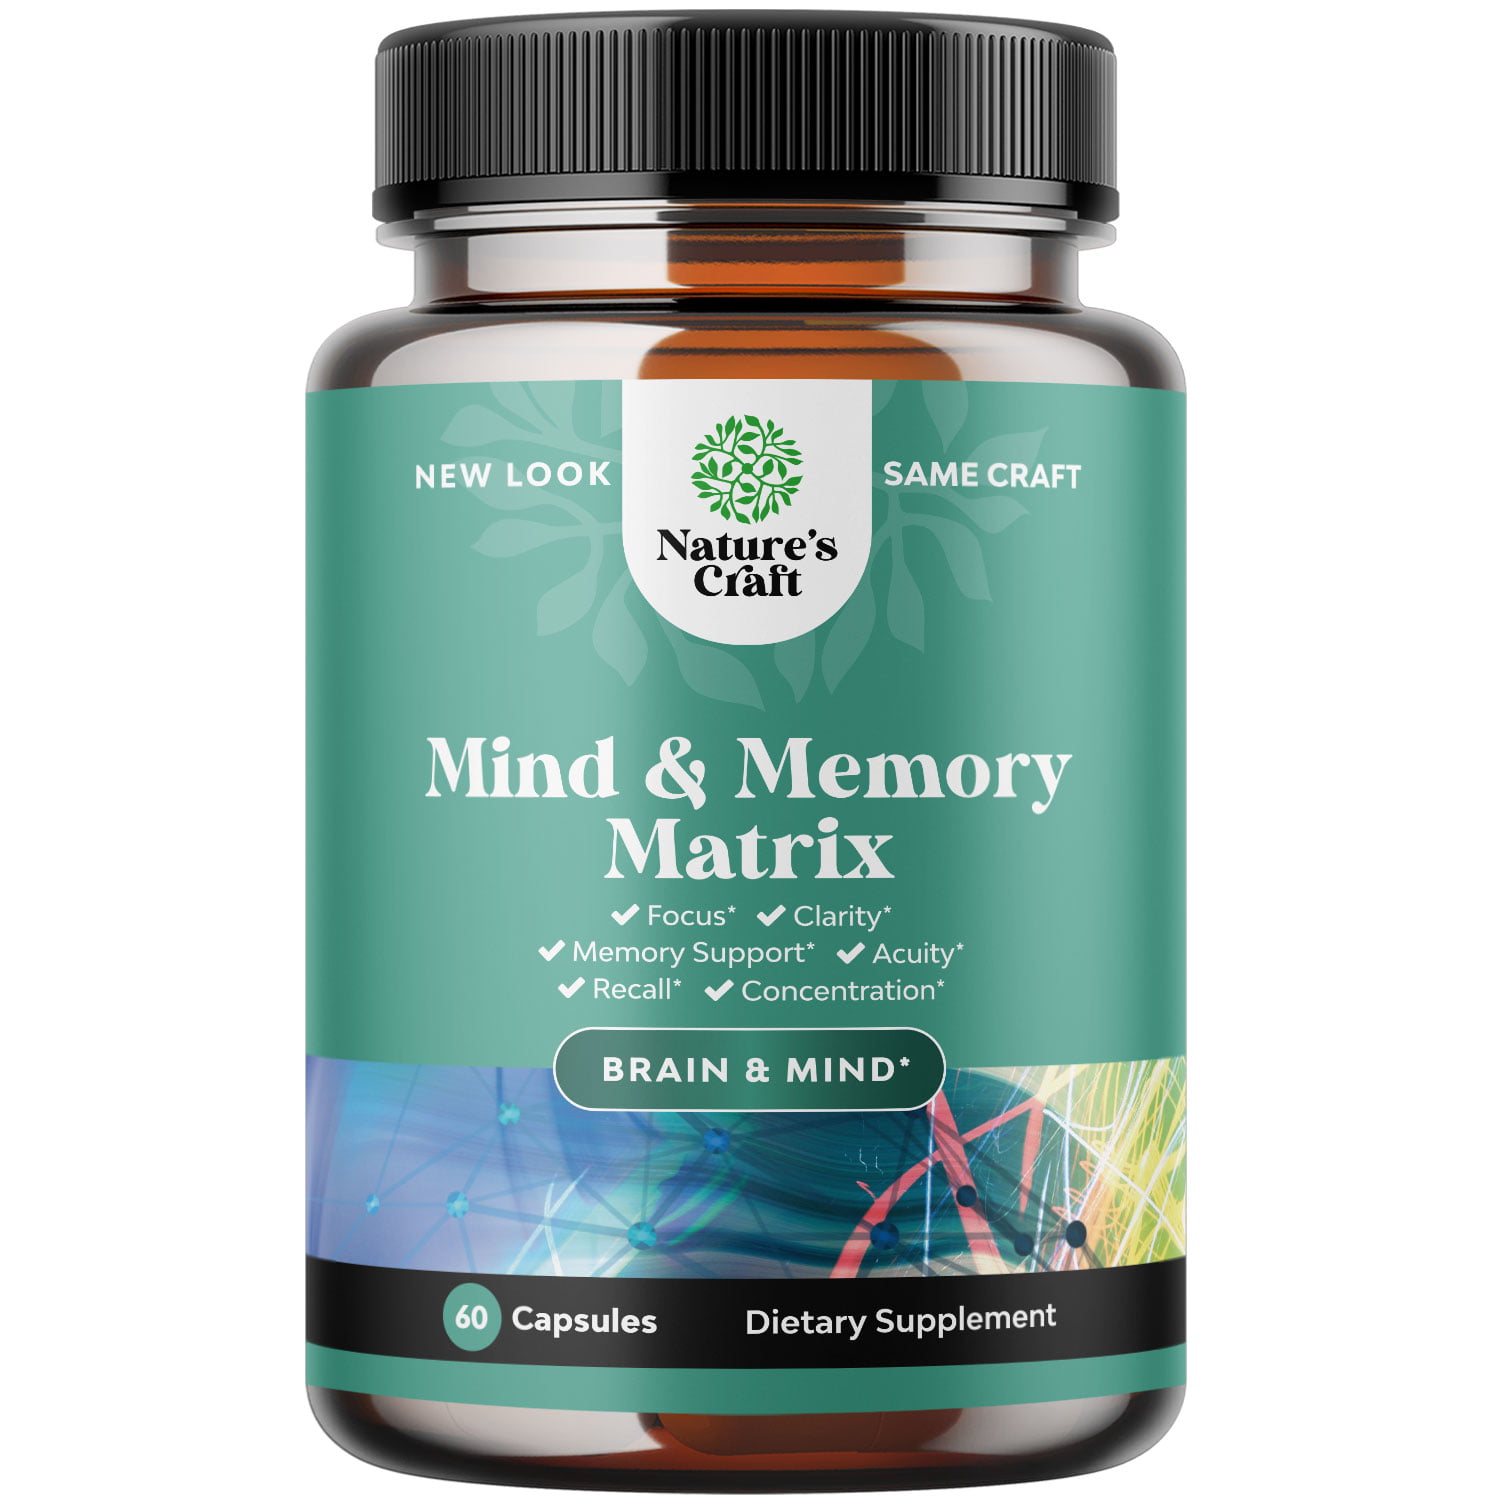 Natural Brain Nutrition with Vitamins and Herbs